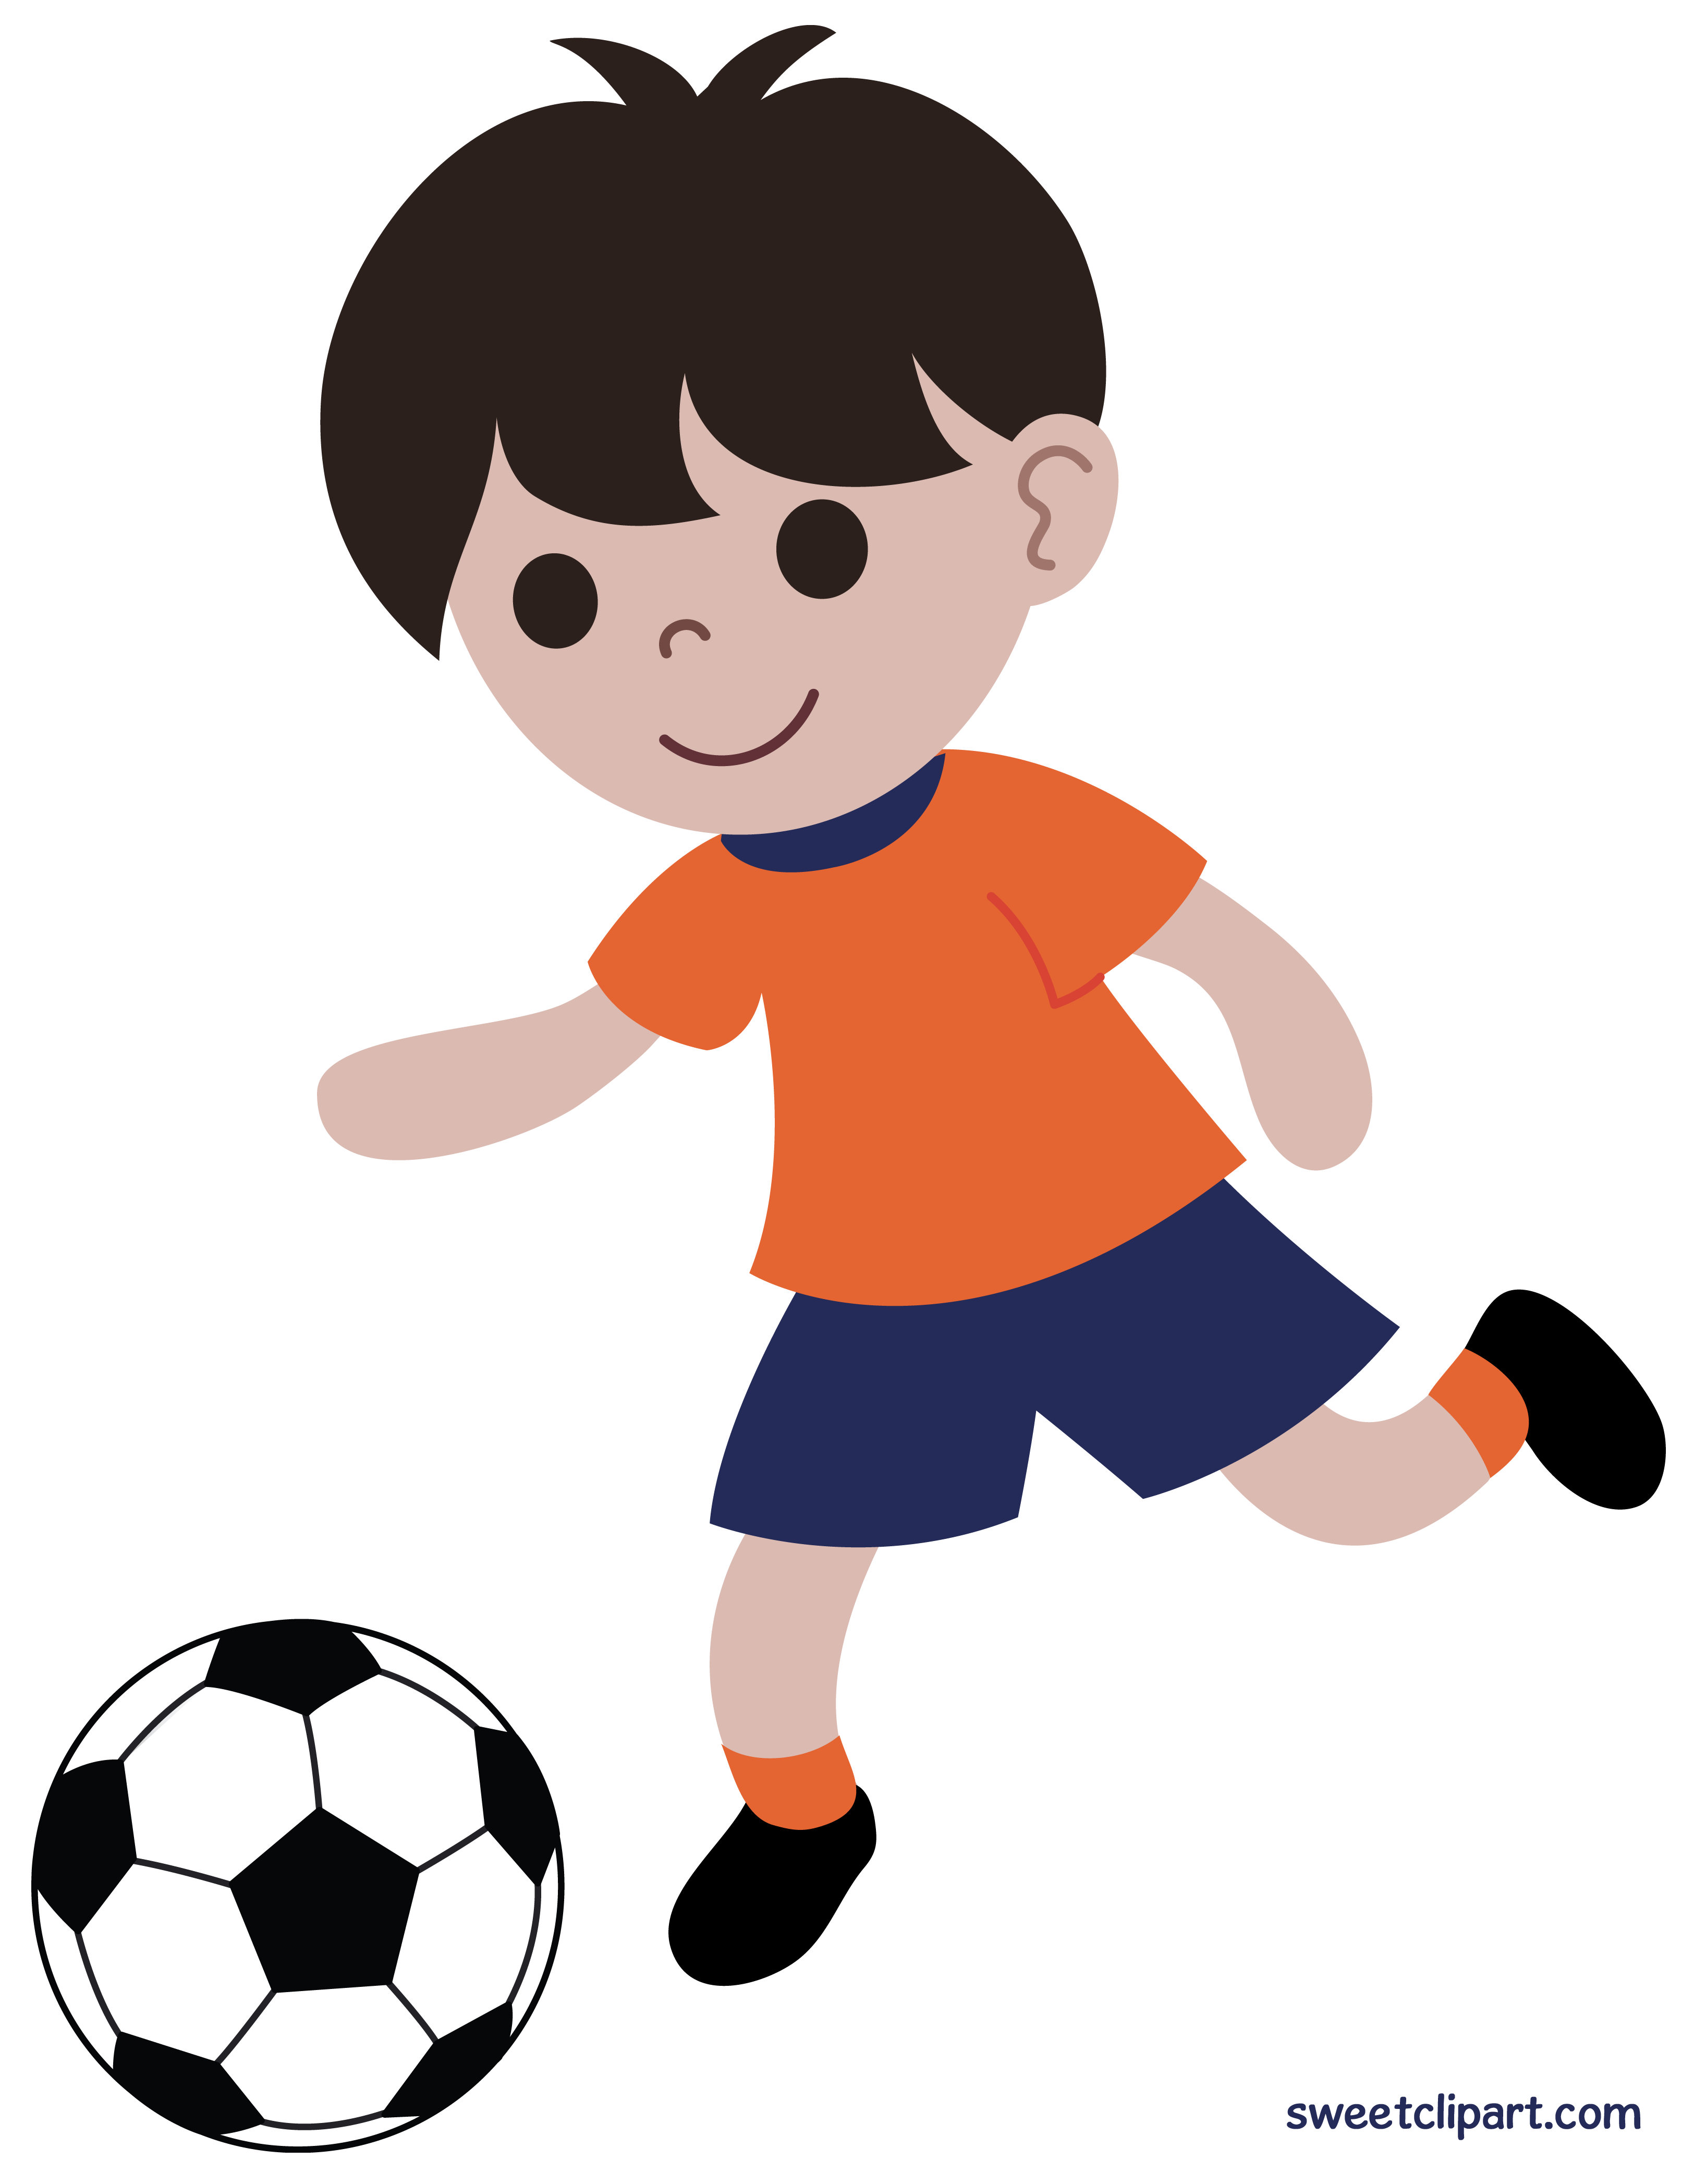 Judge clipart sport. Boy playing soccer or